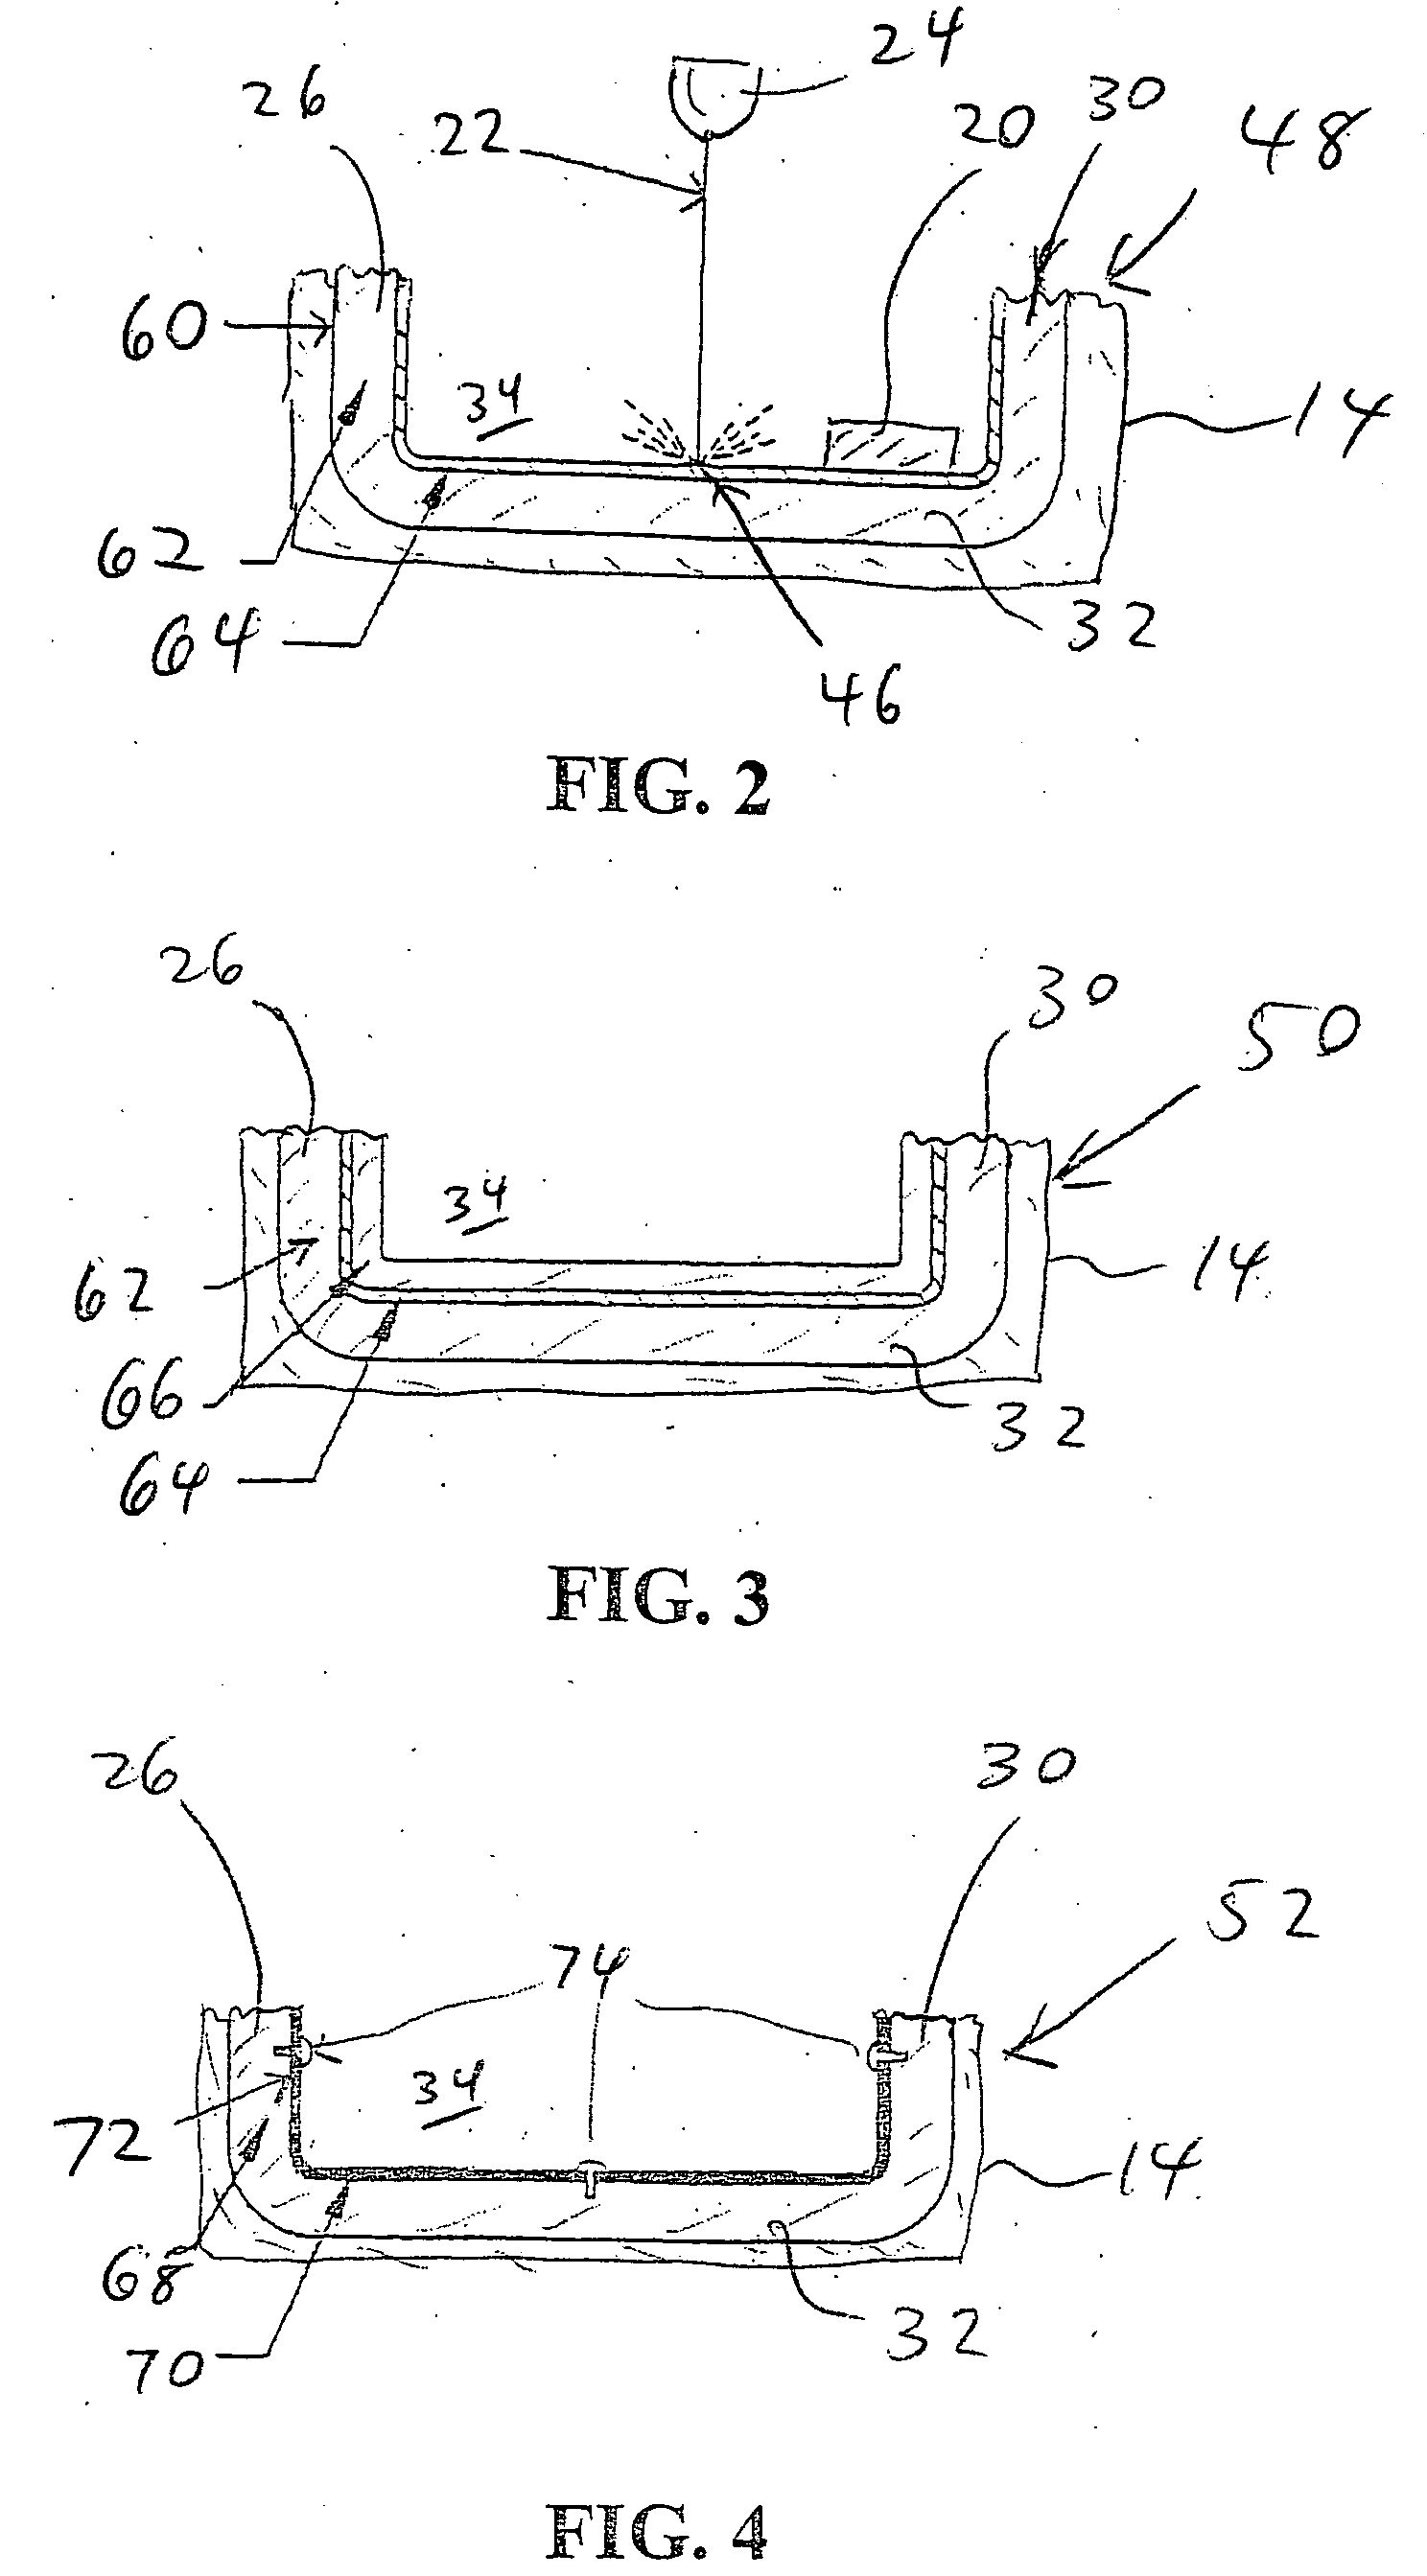 Laser containment structure allowing the use of plastics